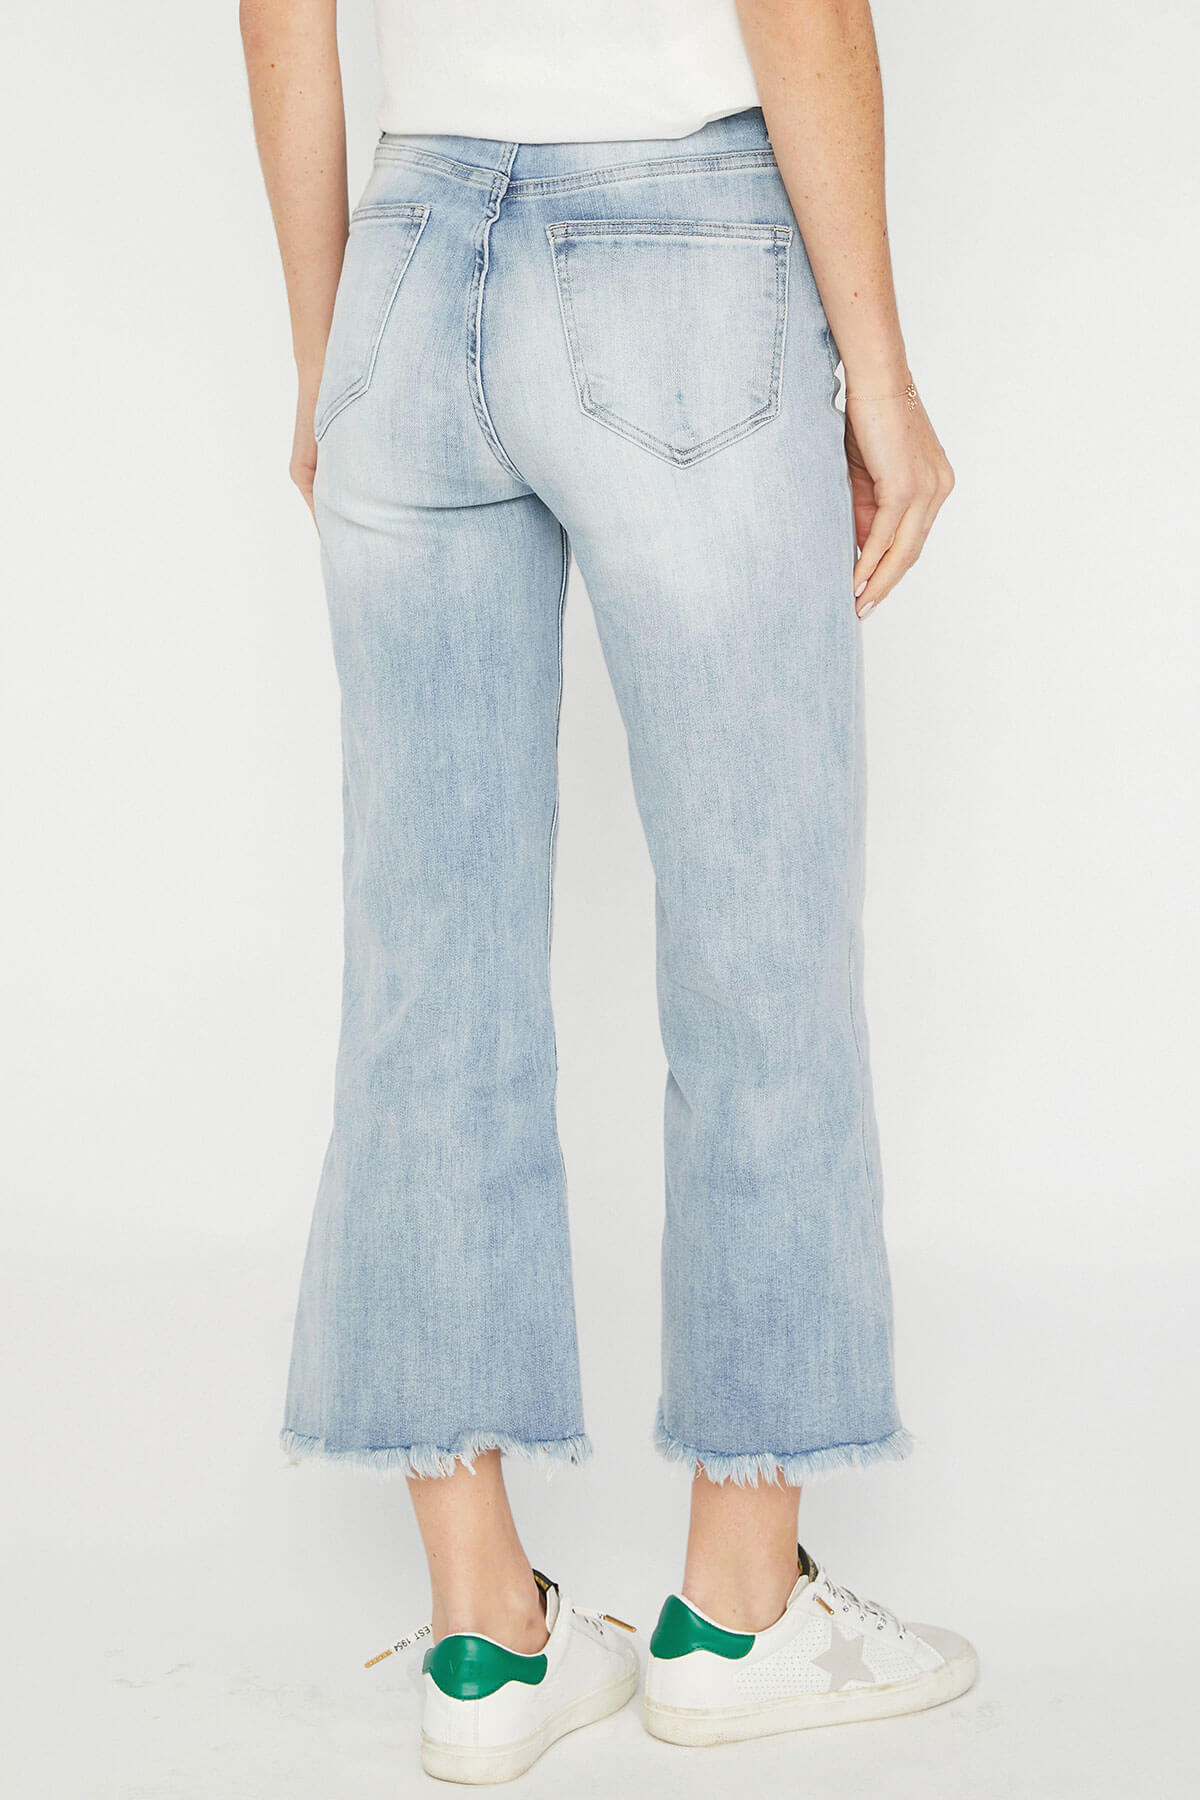 Risen Lighter Days Cropped Jeans